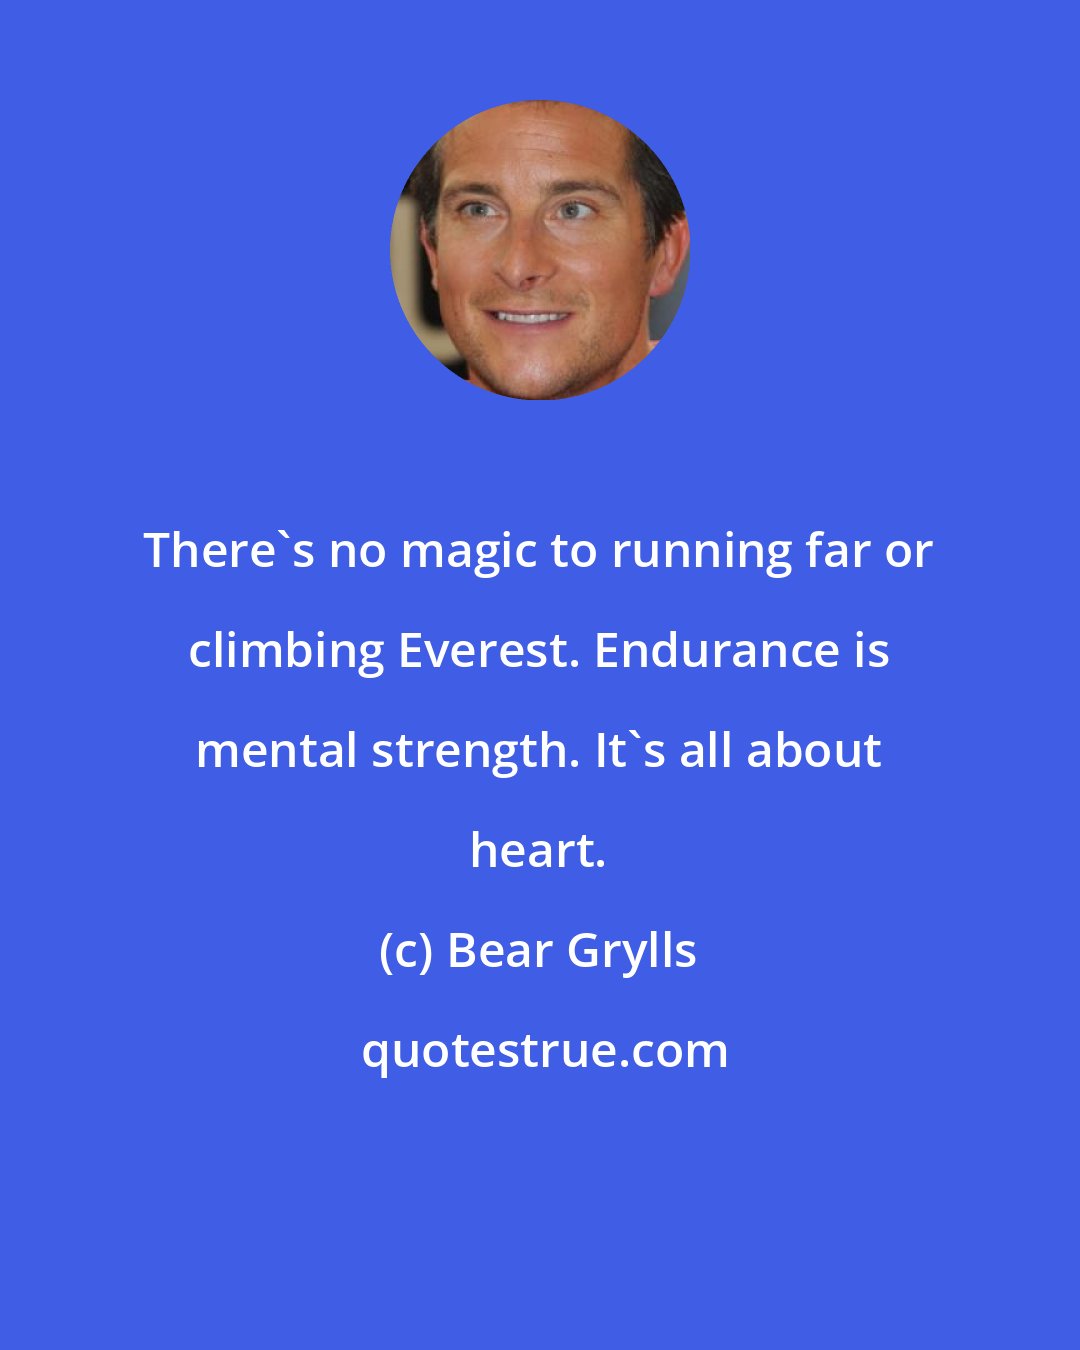 Bear Grylls: There's no magic to running far or climbing Everest. Endurance is mental strength. It's all about heart.